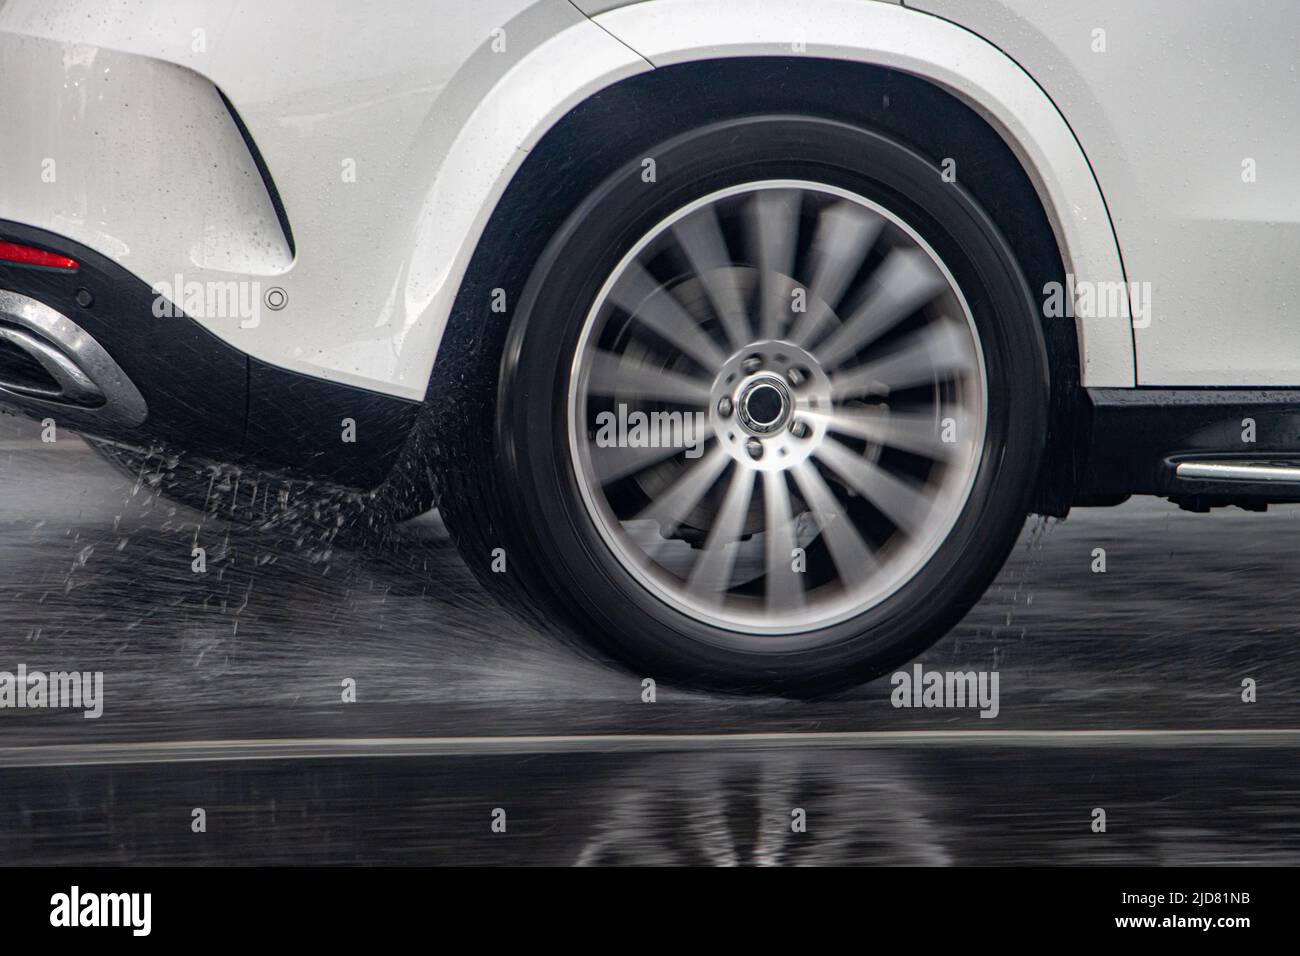 Detail of the rear wheel of a car driving in the rain on a wet road. Stock Photo